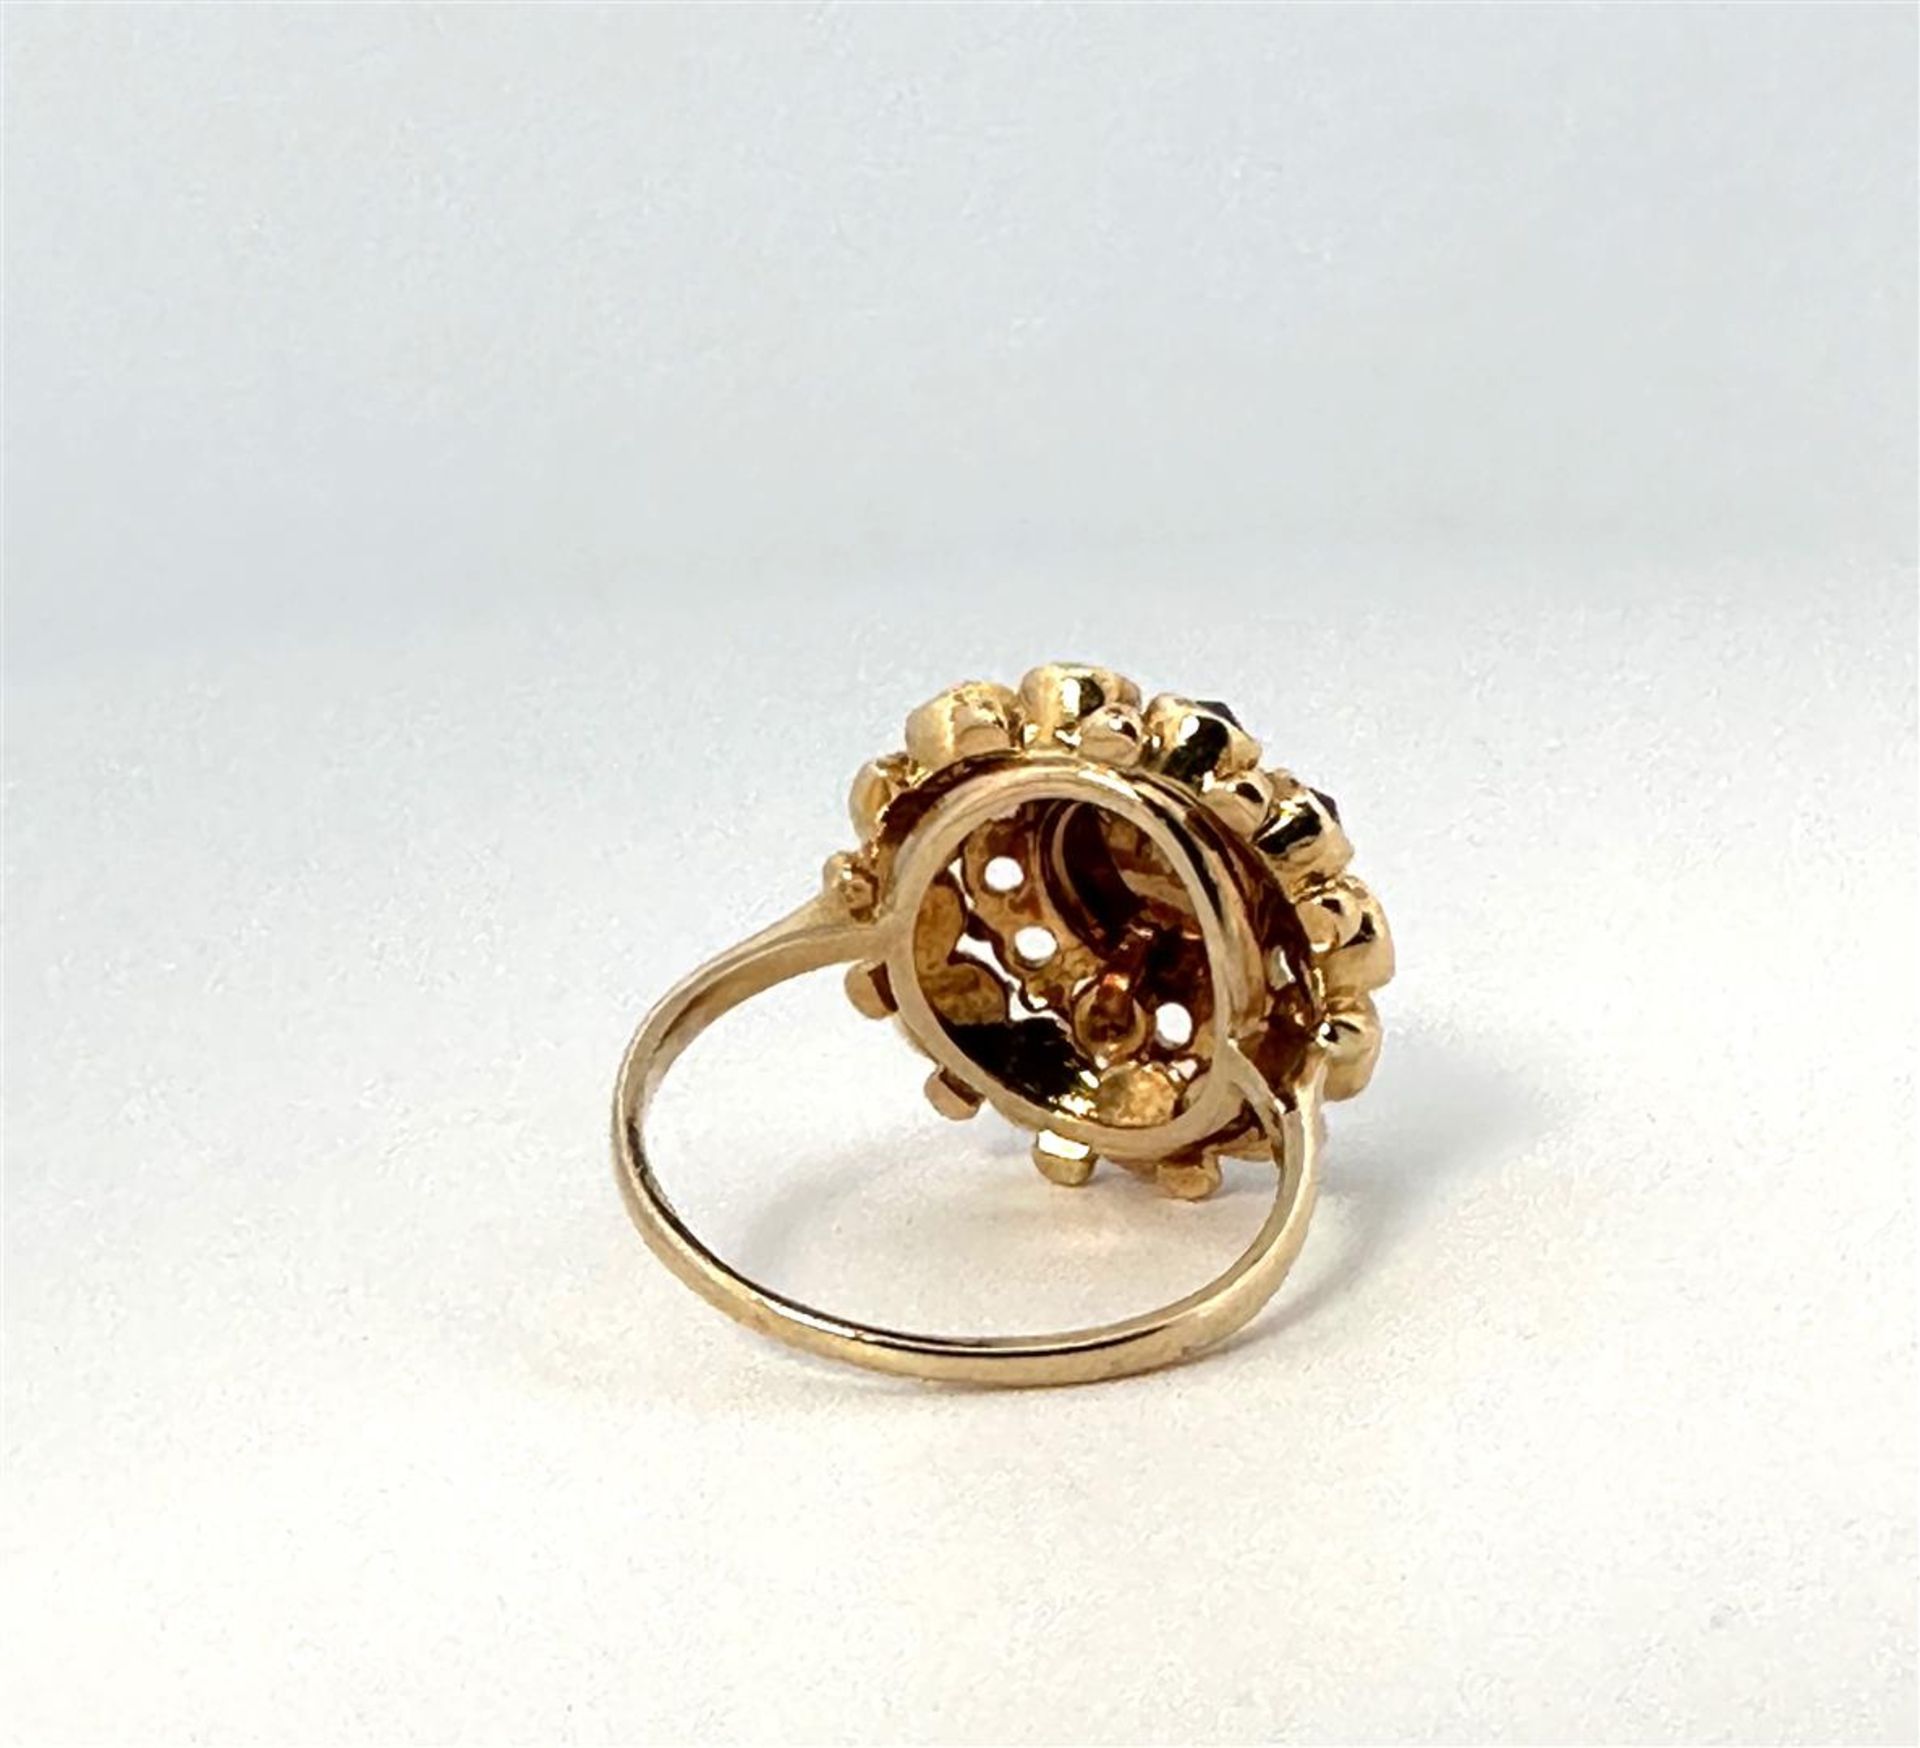 14kt yellow gold rosette ring set with garnet.
The ring is set with 1 central stone, rose cut of app - Image 3 of 4